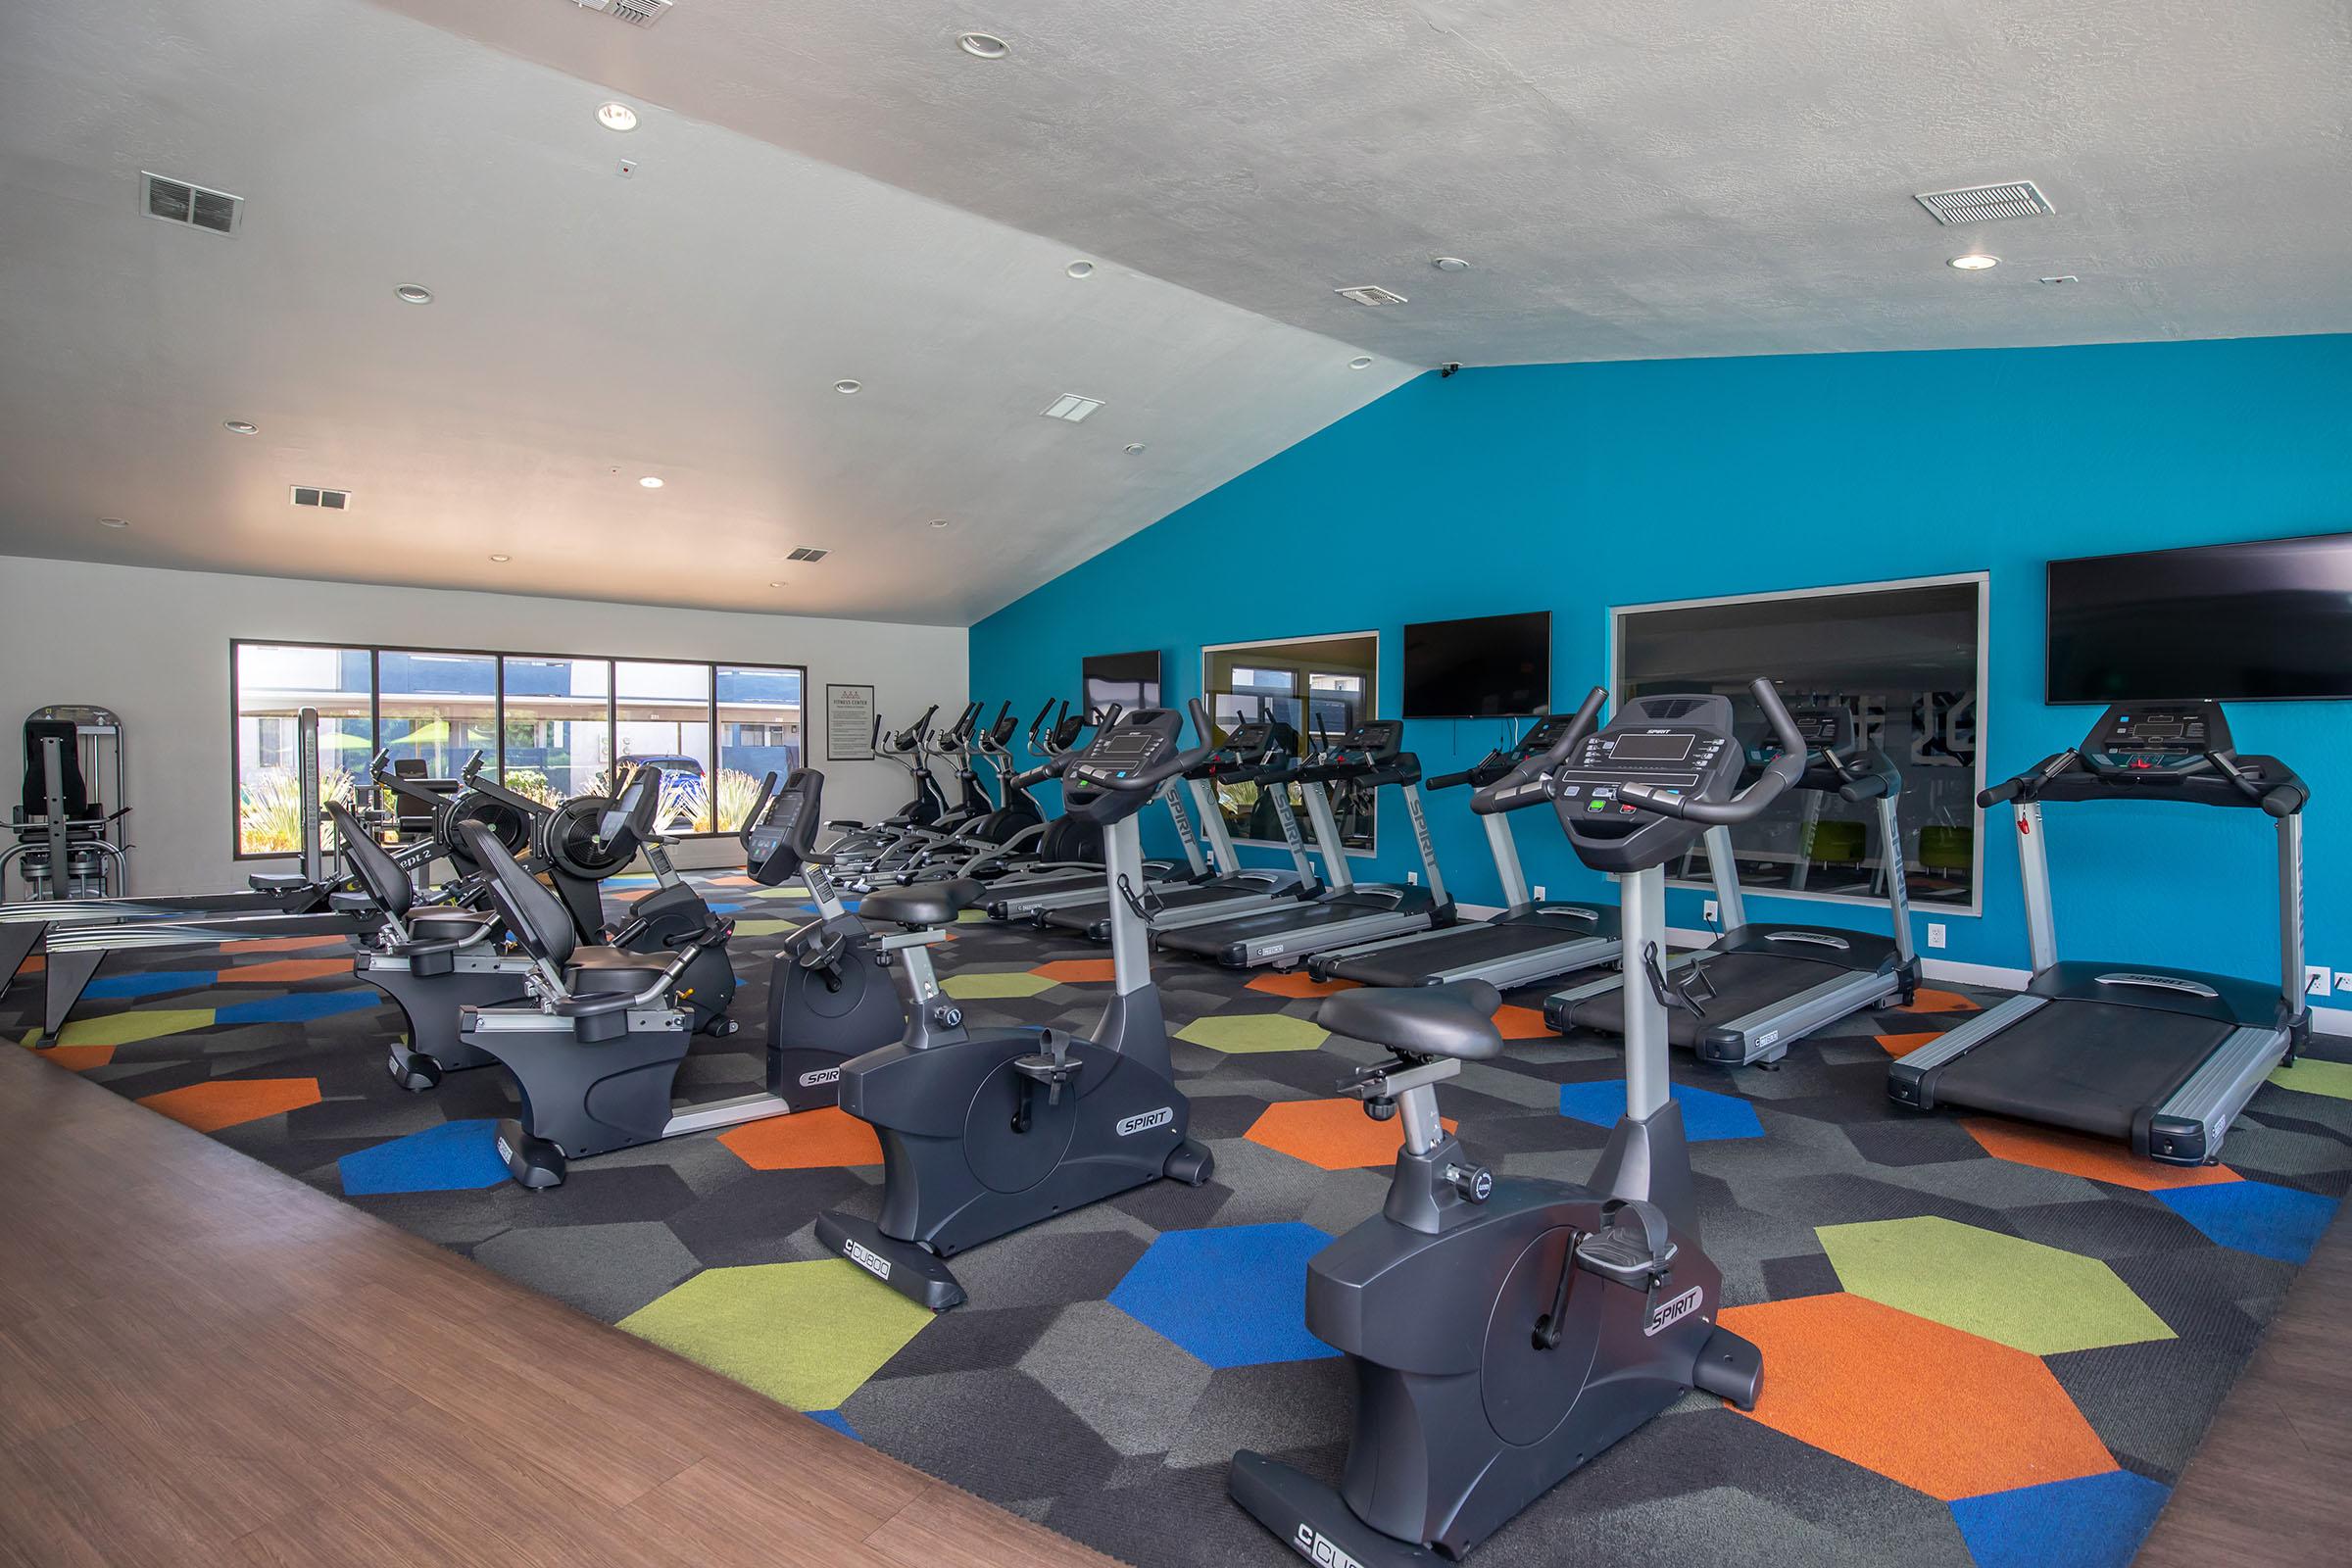 Rise at the District apartments indoor fitness center facility with workout machines and flat screen TVs